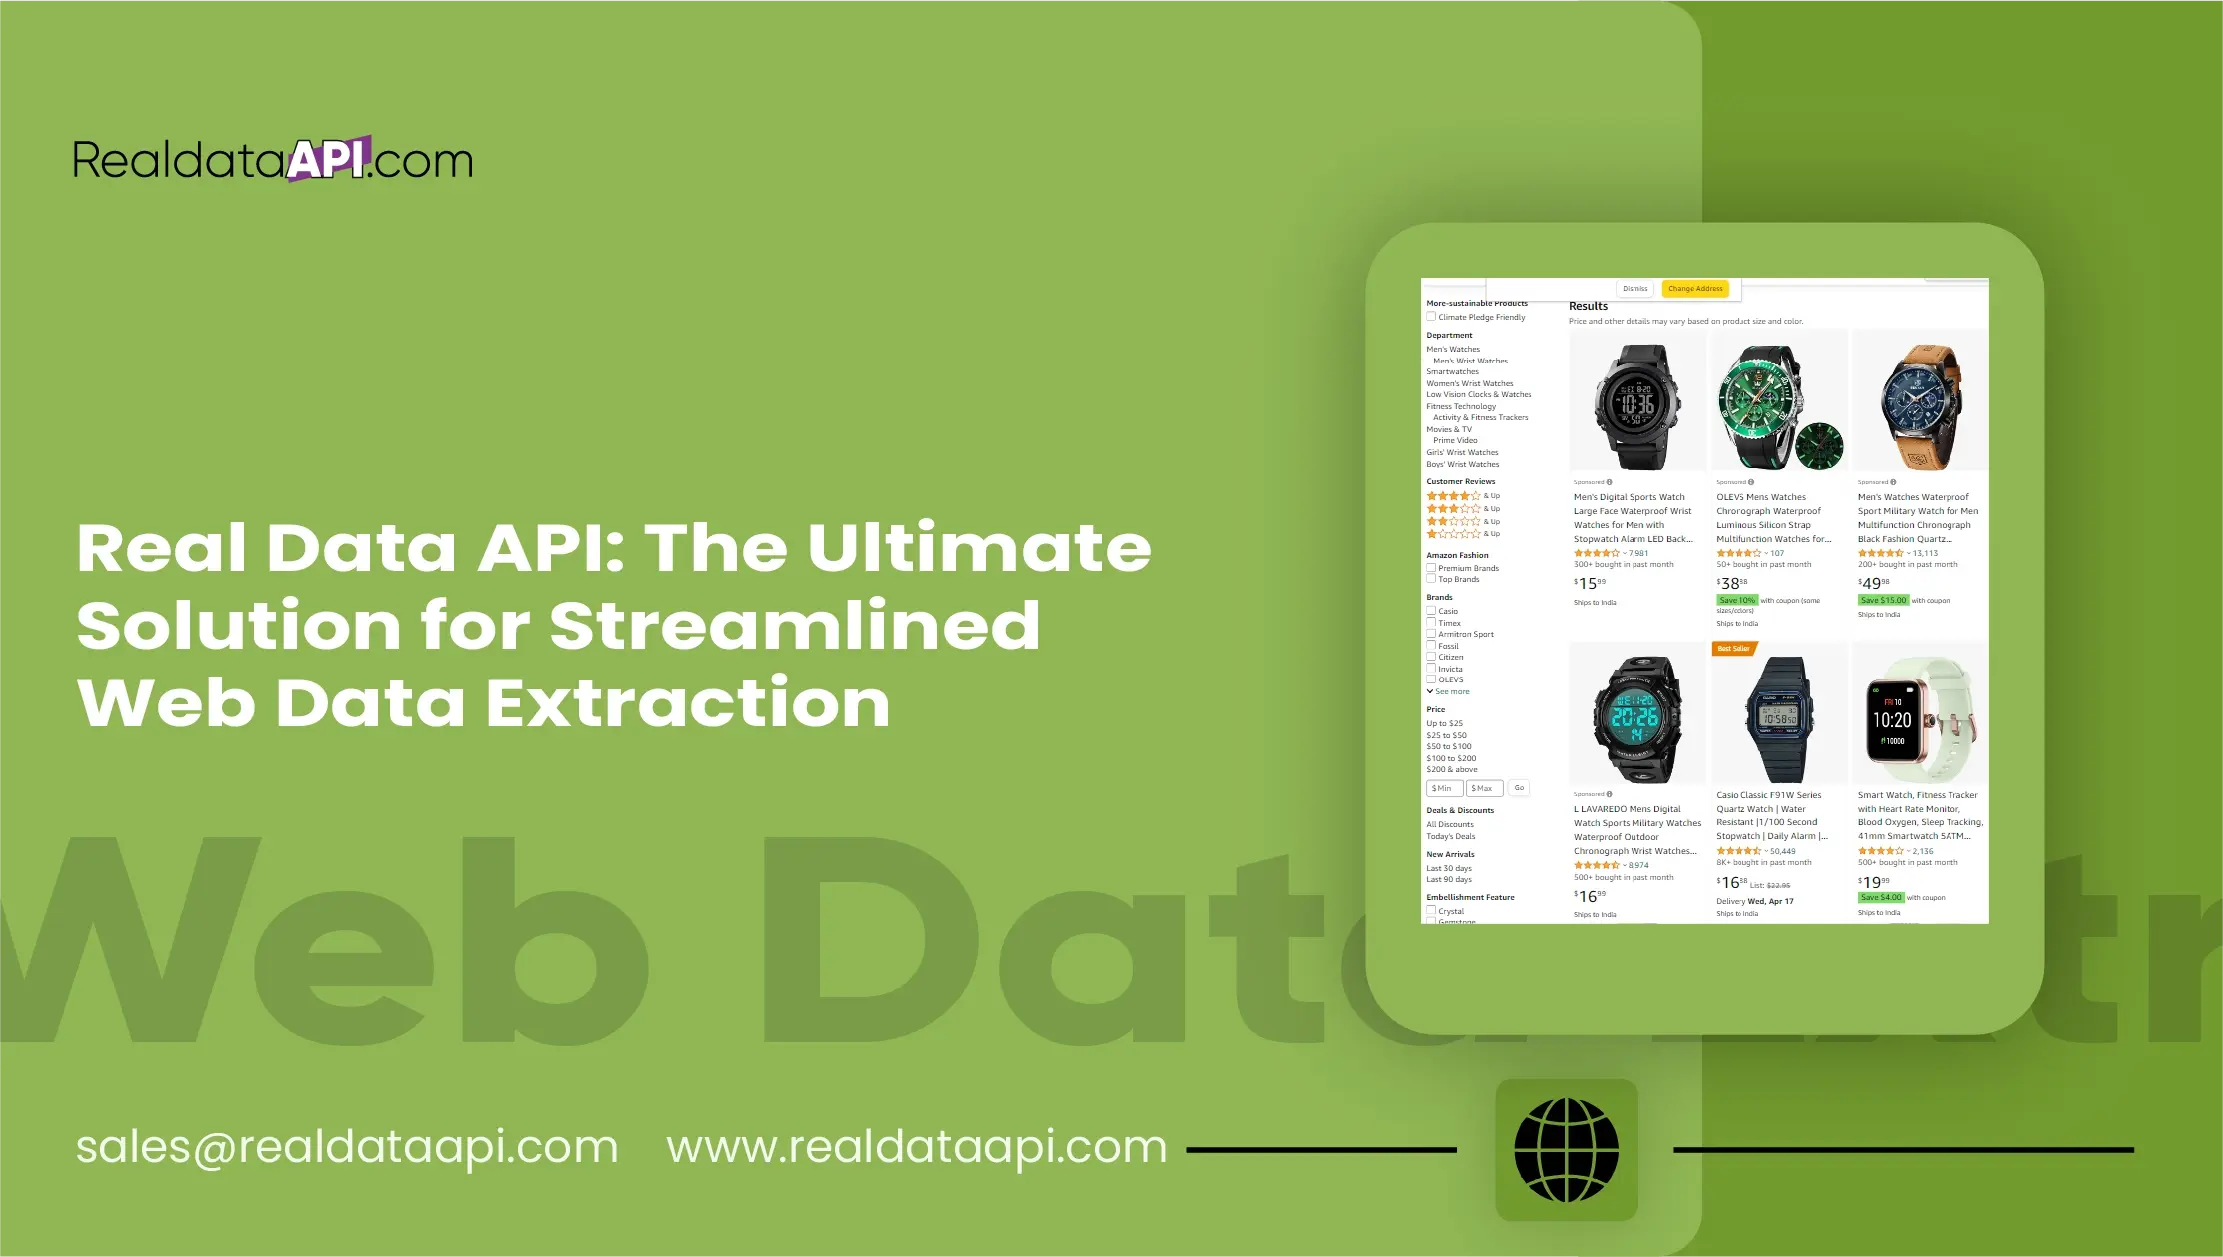 Real Data API The Ultimate Solution for Streamlined Web Data Extraction-01